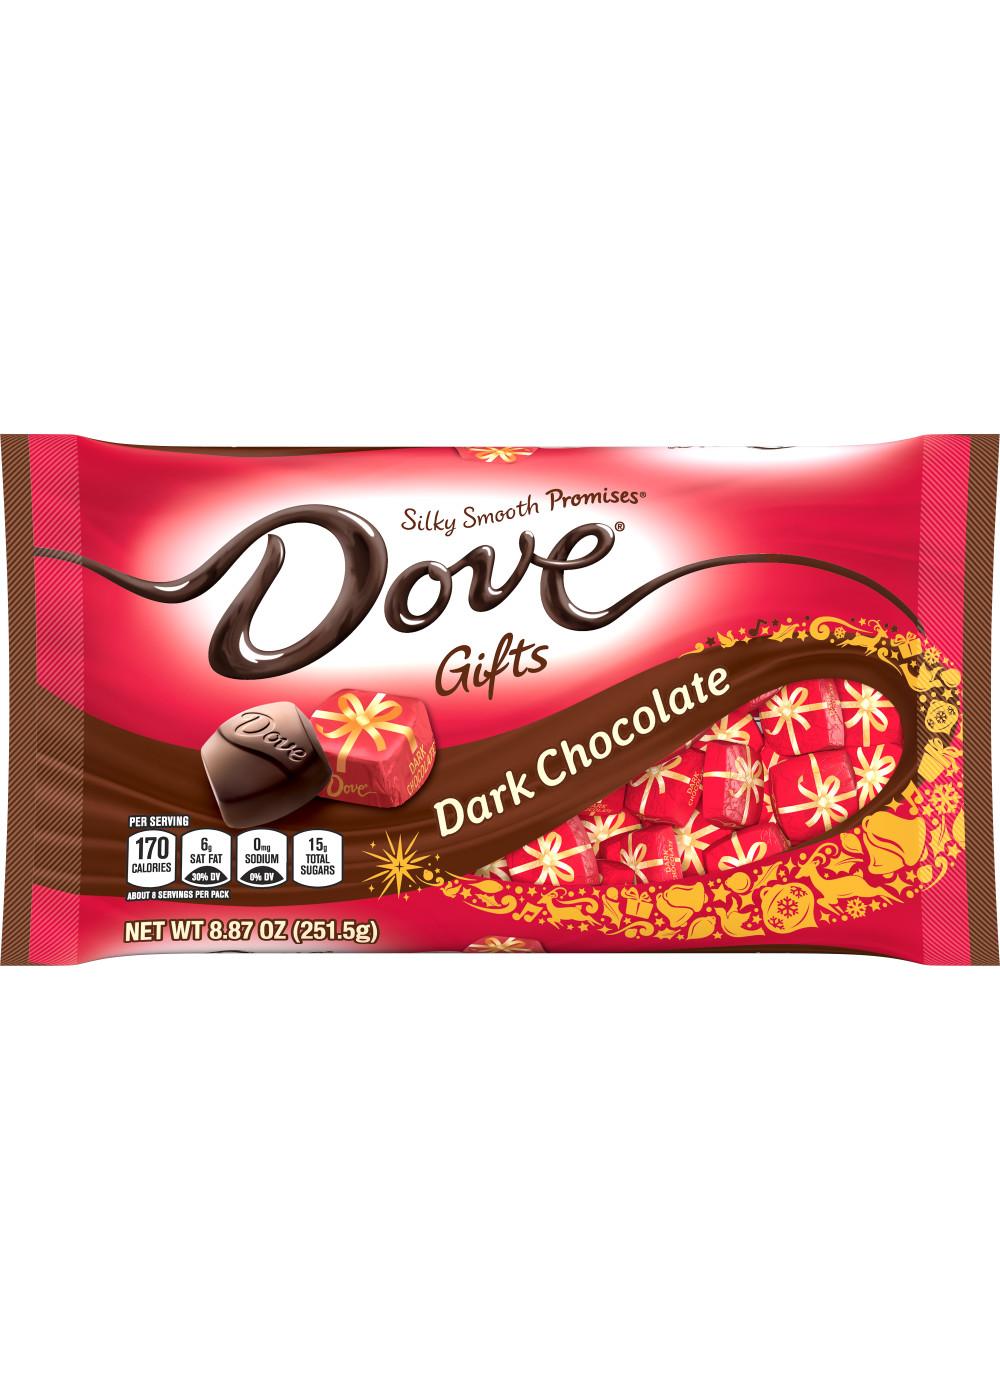 Dove Gifts Dark Chocolate Holiday Candy; image 1 of 8